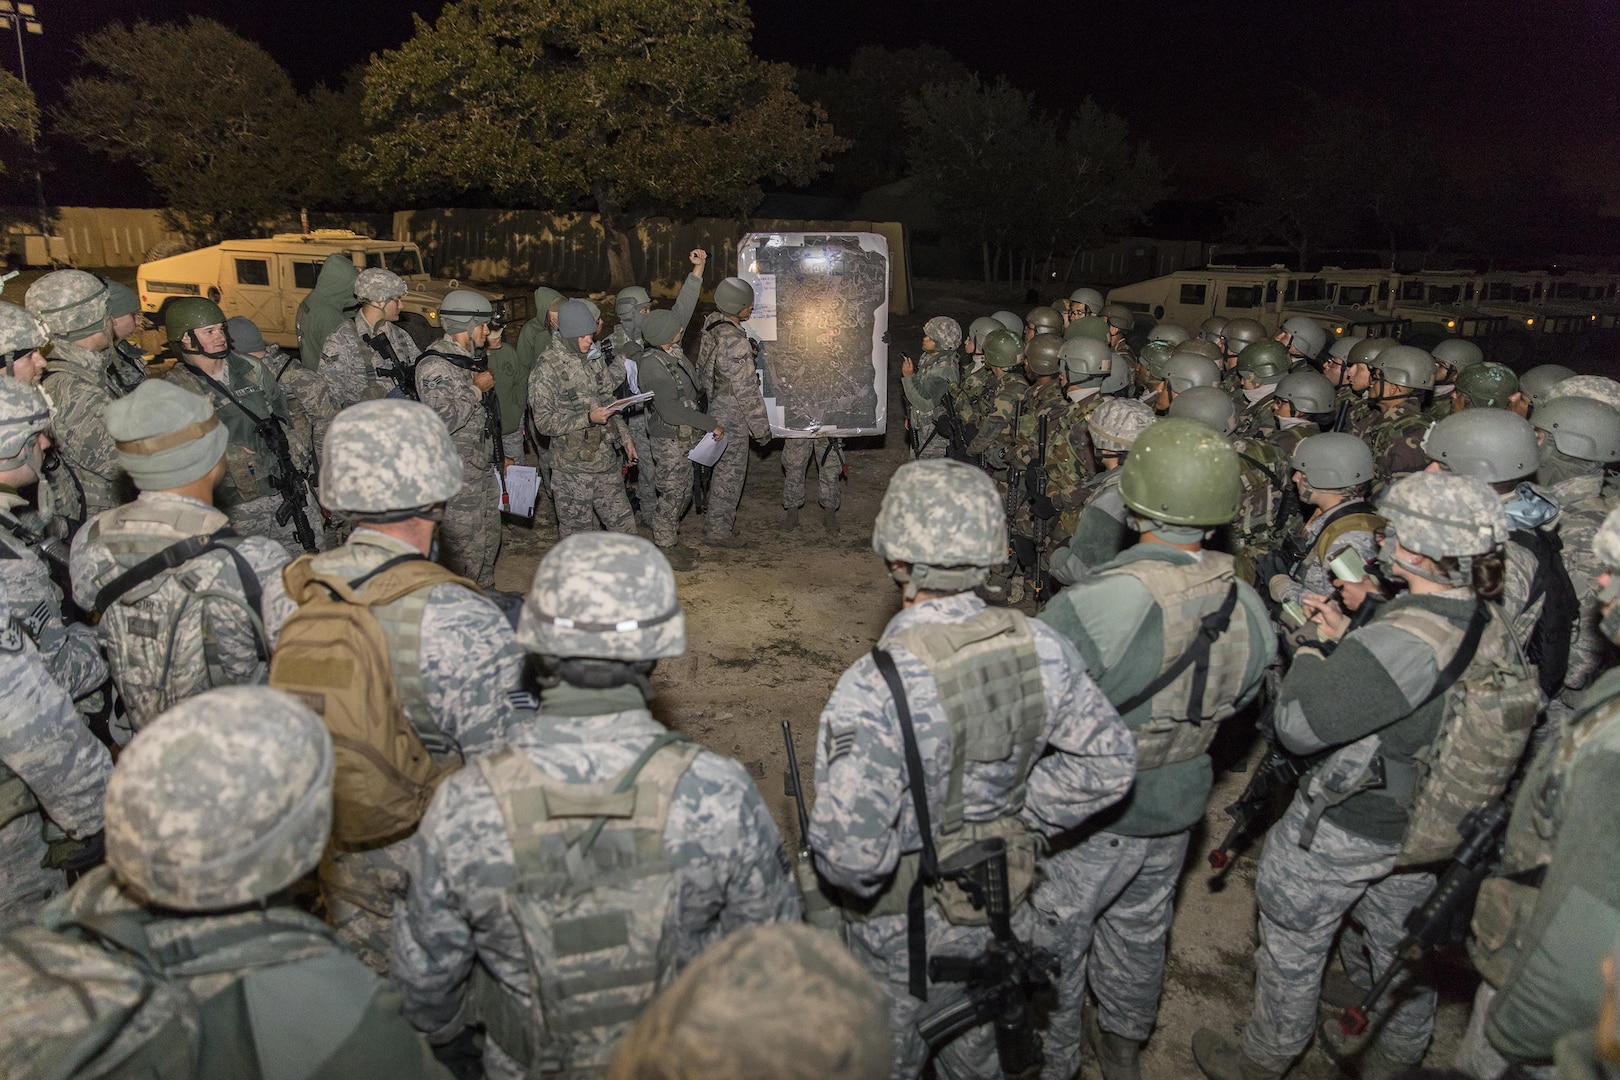 Students from the Inter-American Air Force Academy’s 837th Training Squadron and 343rd TRS attend a pre-mission briefing at Joint Base San Antonio-Camp Bullis as part of their final training exercise Nov. 8, 2017. The students practiced reconnaissance, ambush, searching, and patrolling tactics. This was the first time the 837th TRS and 343rd TRS partnered for joint training.